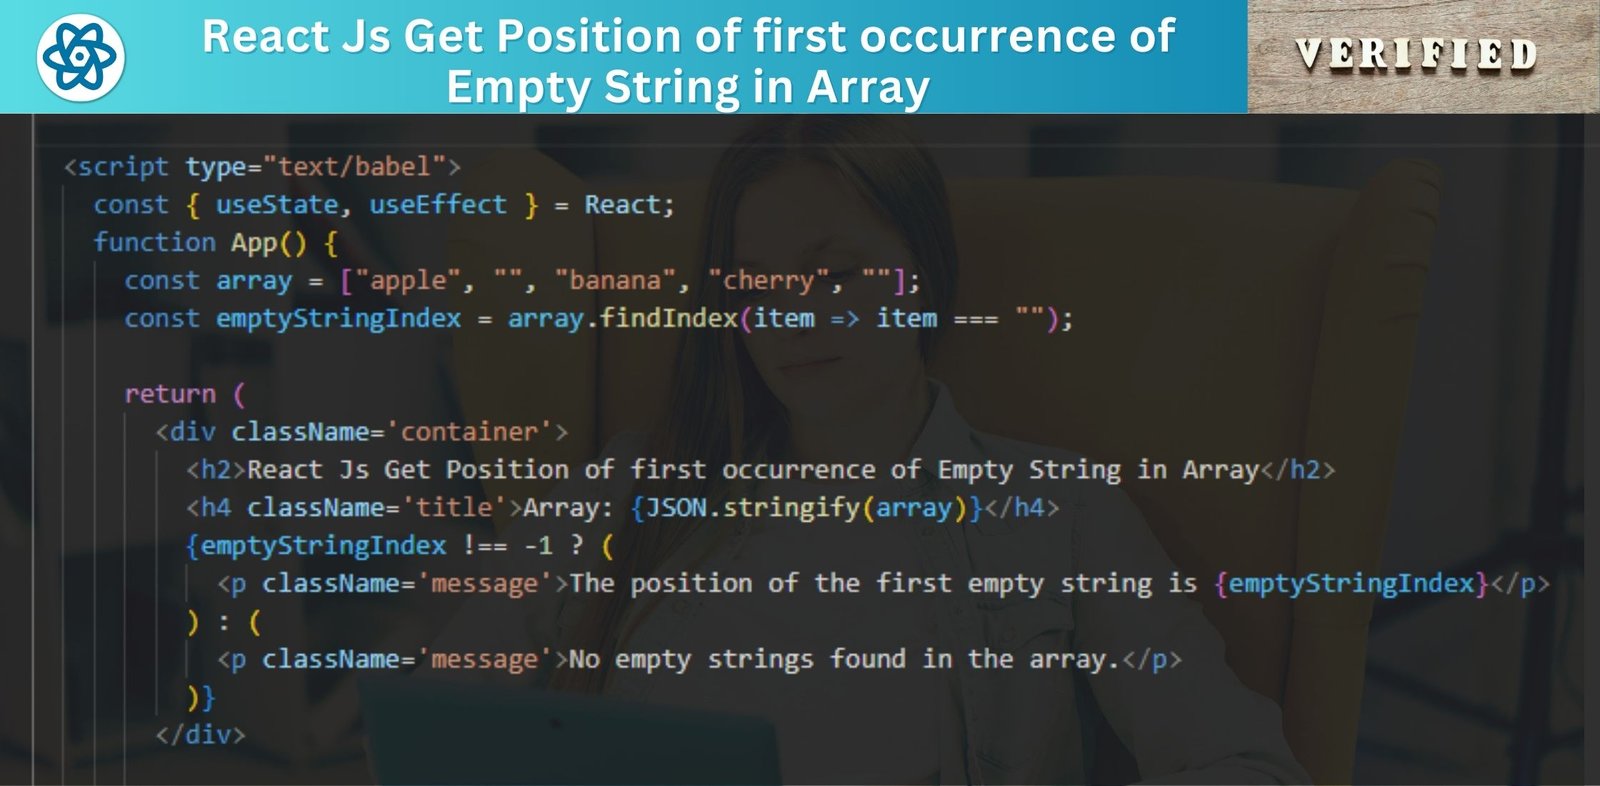 React Js Get Position of first occurrence of Empty String in Array